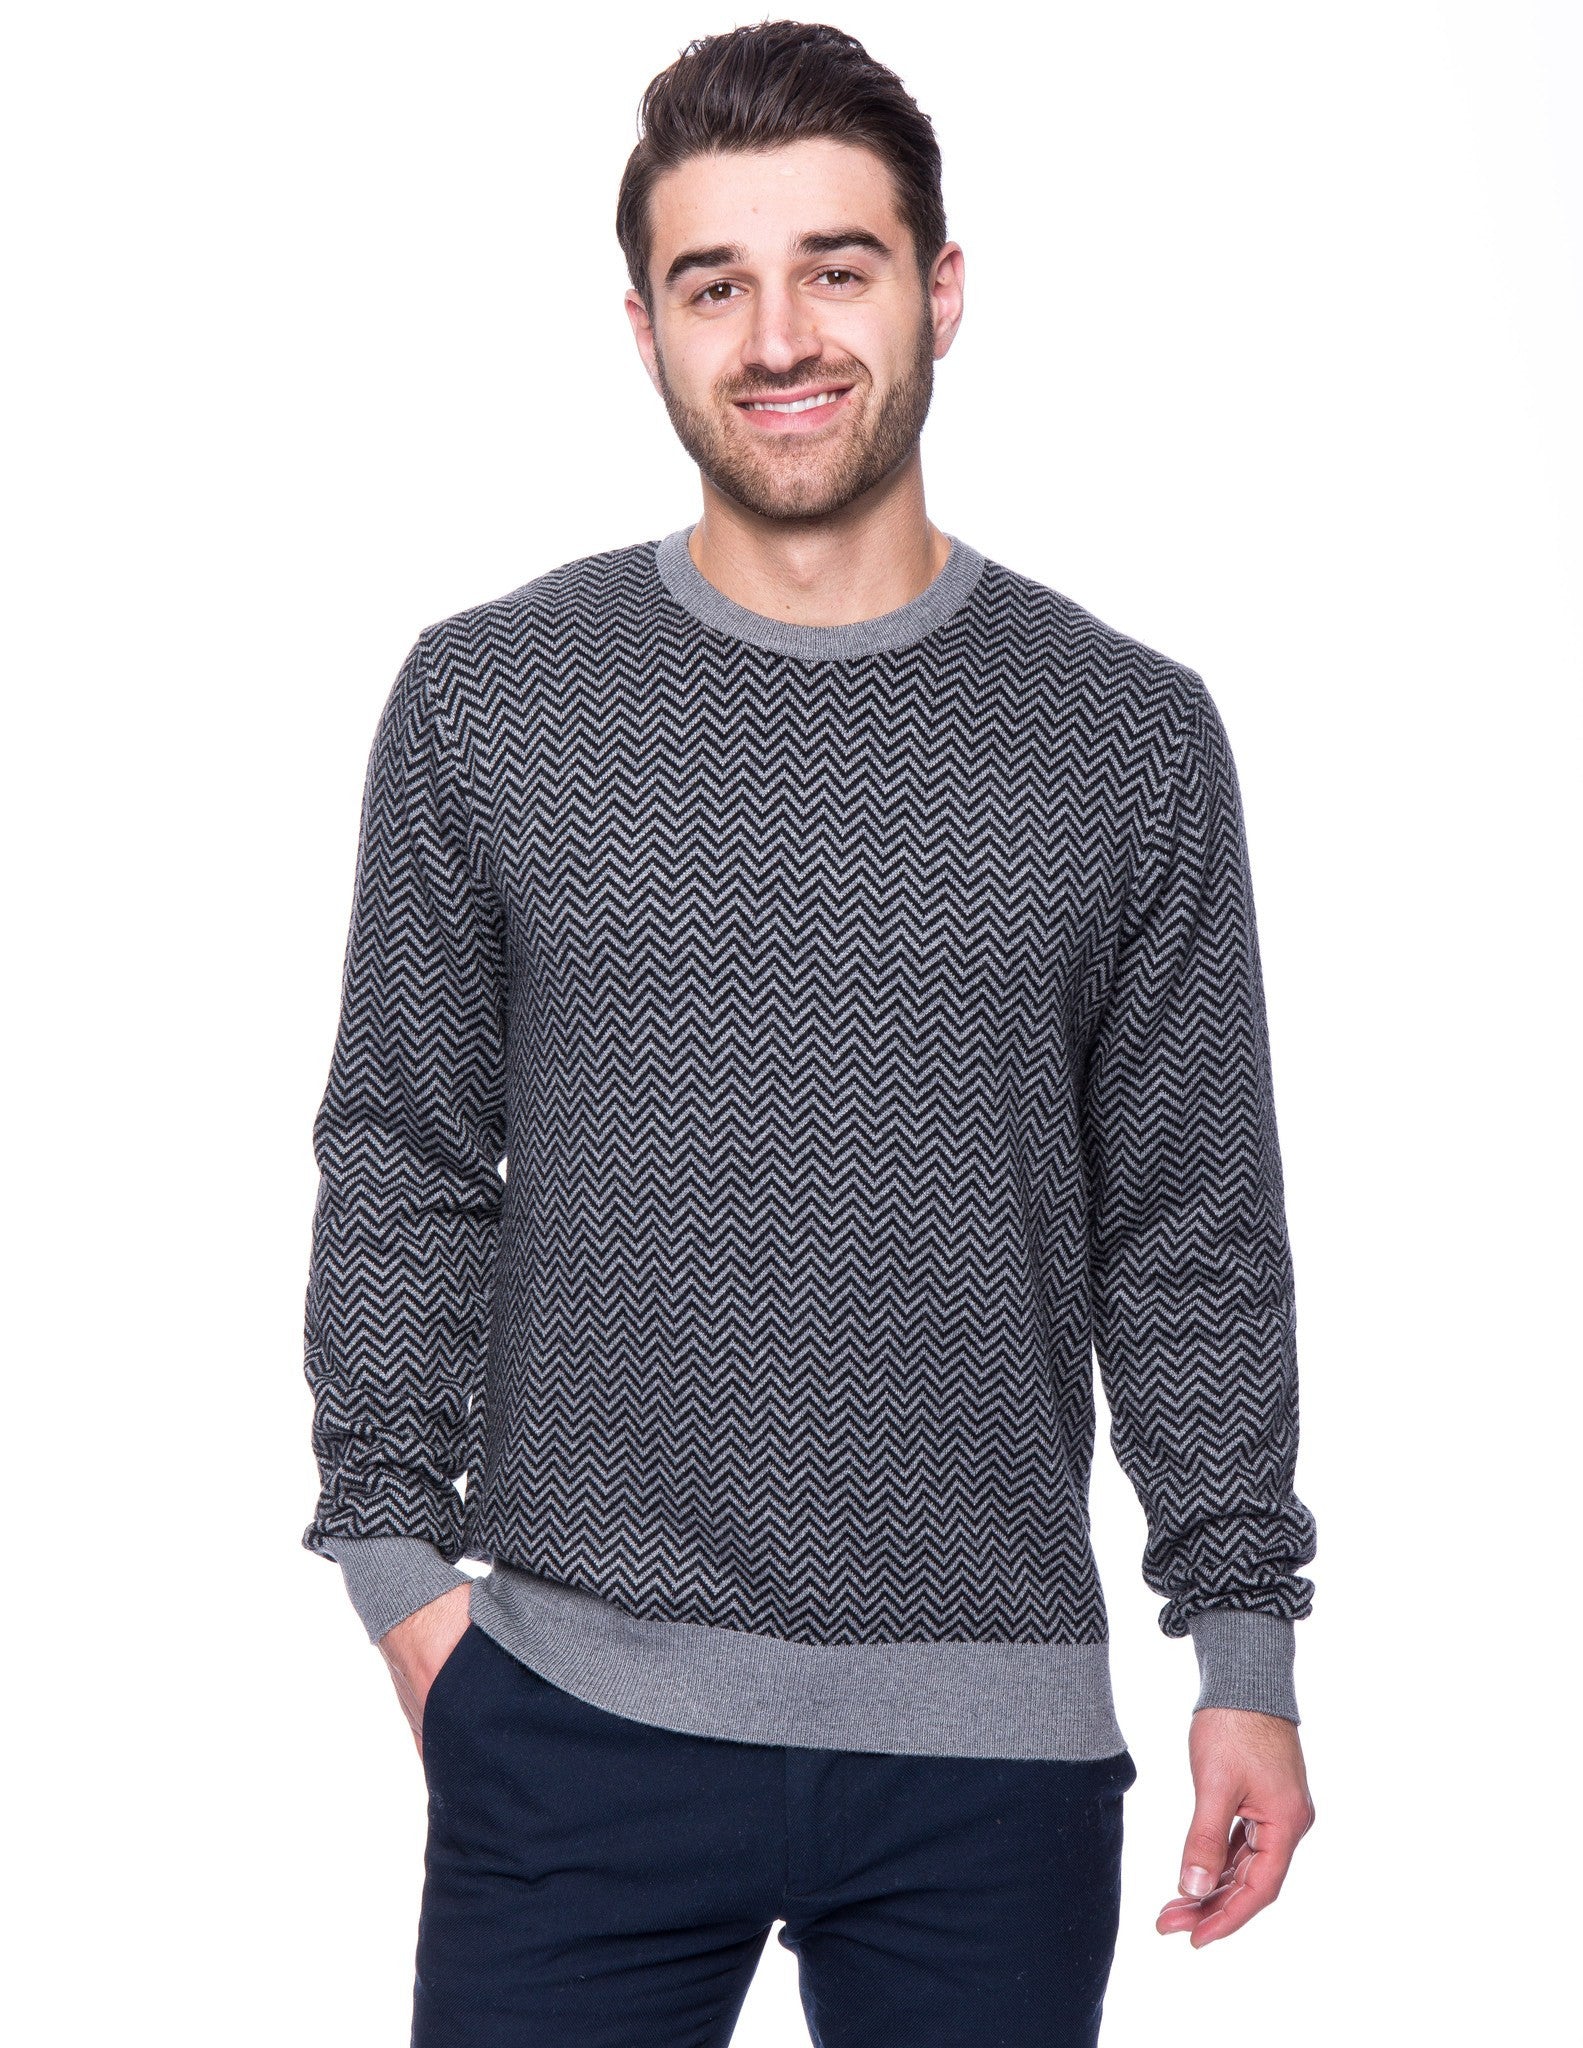 Box-Packaged Tocco Reale Men's Cashmere Blend Crew Neck Sweater